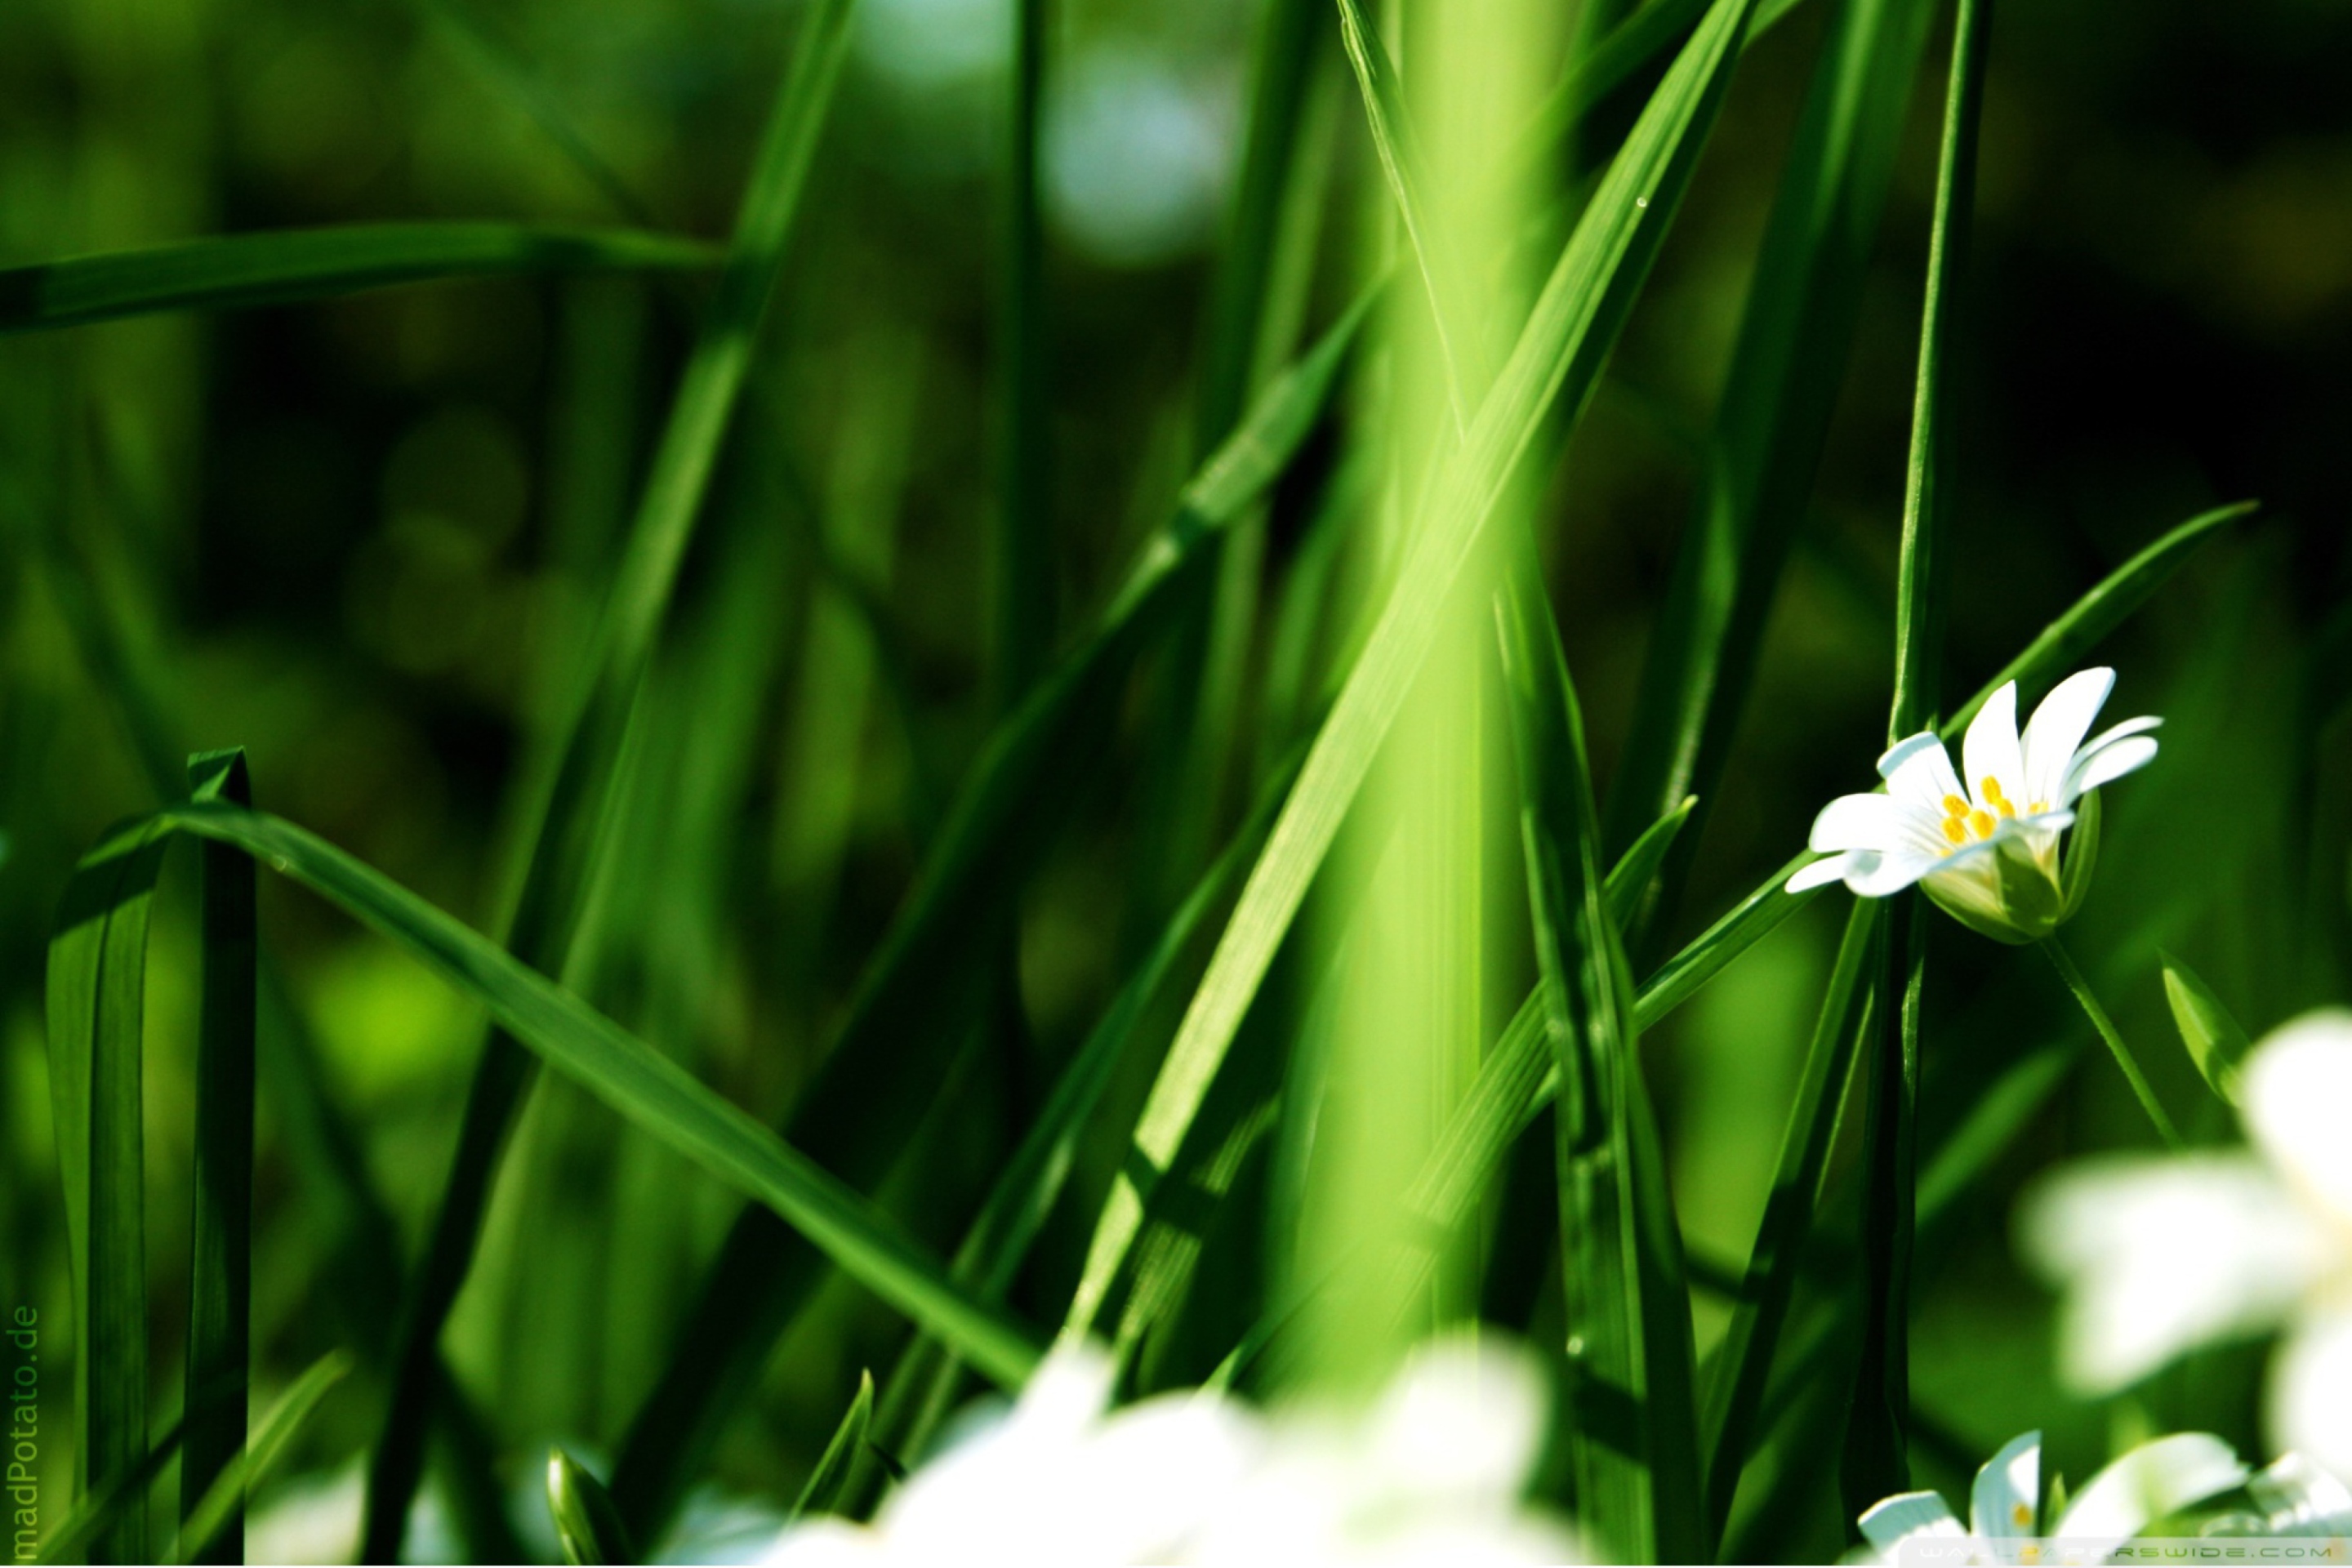 Grass And White Flowers wallpaper 2880x1920